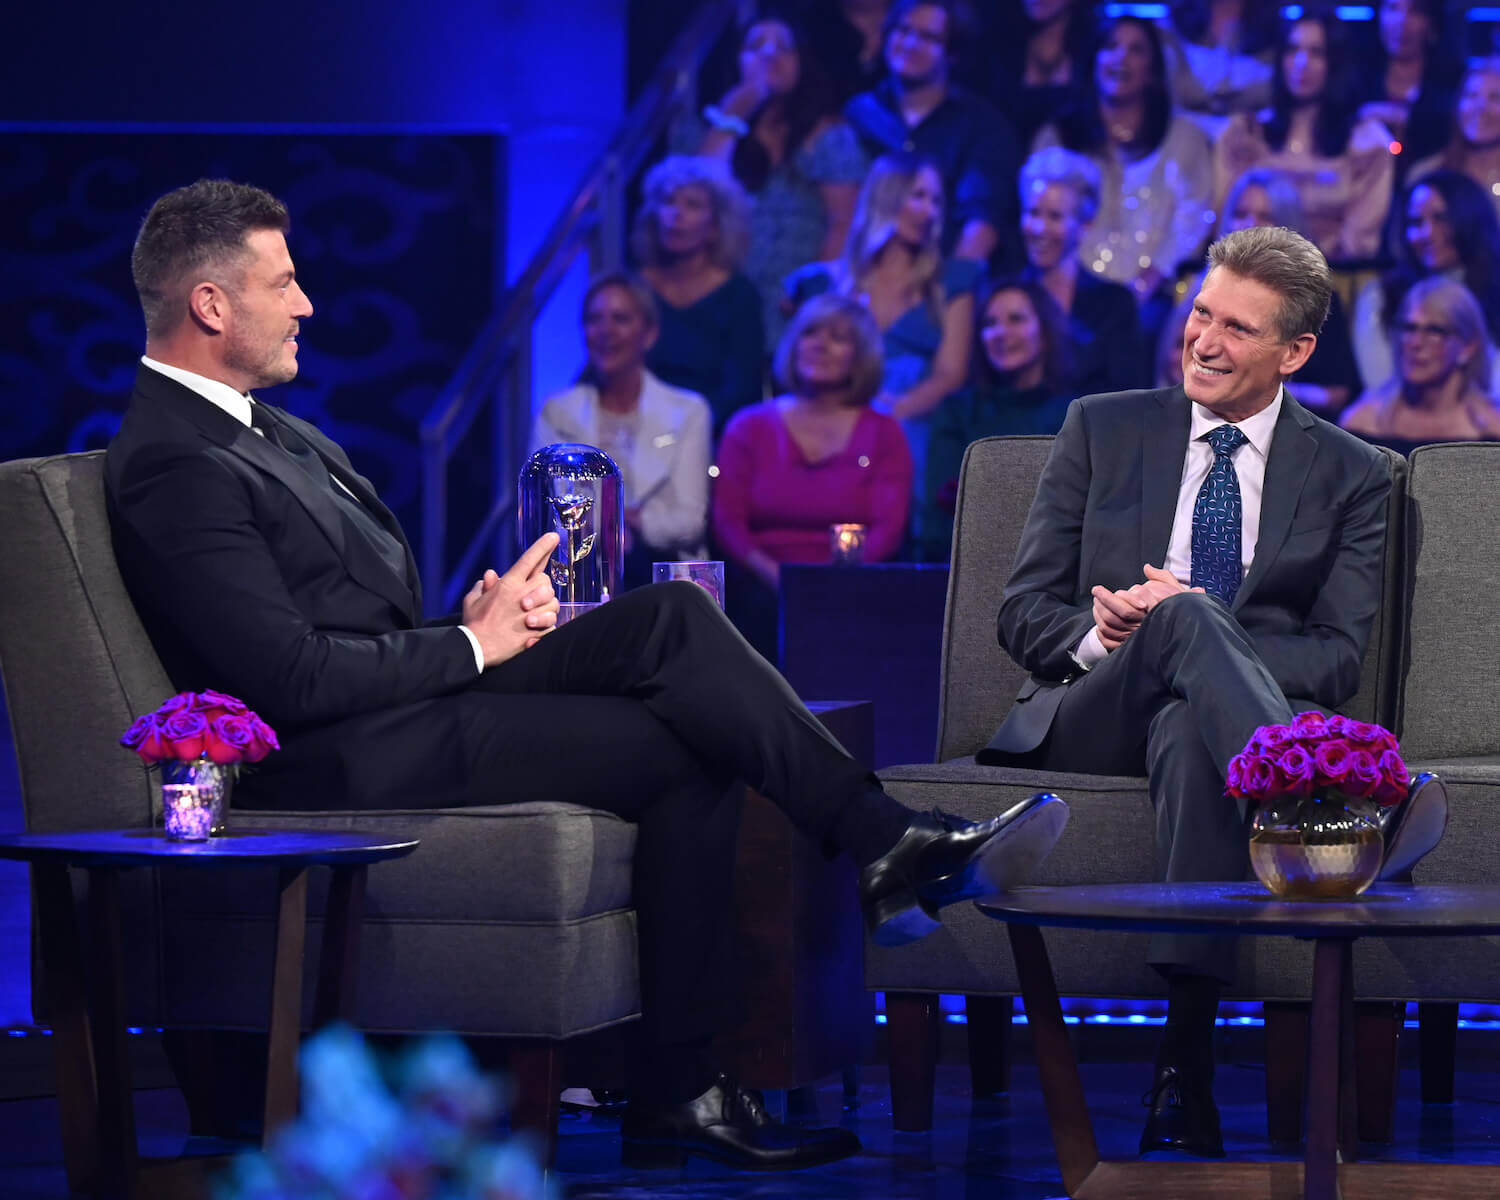 Jesse Palmer sitting on stage with 'The Golden Bachelor' star Gerry Turner